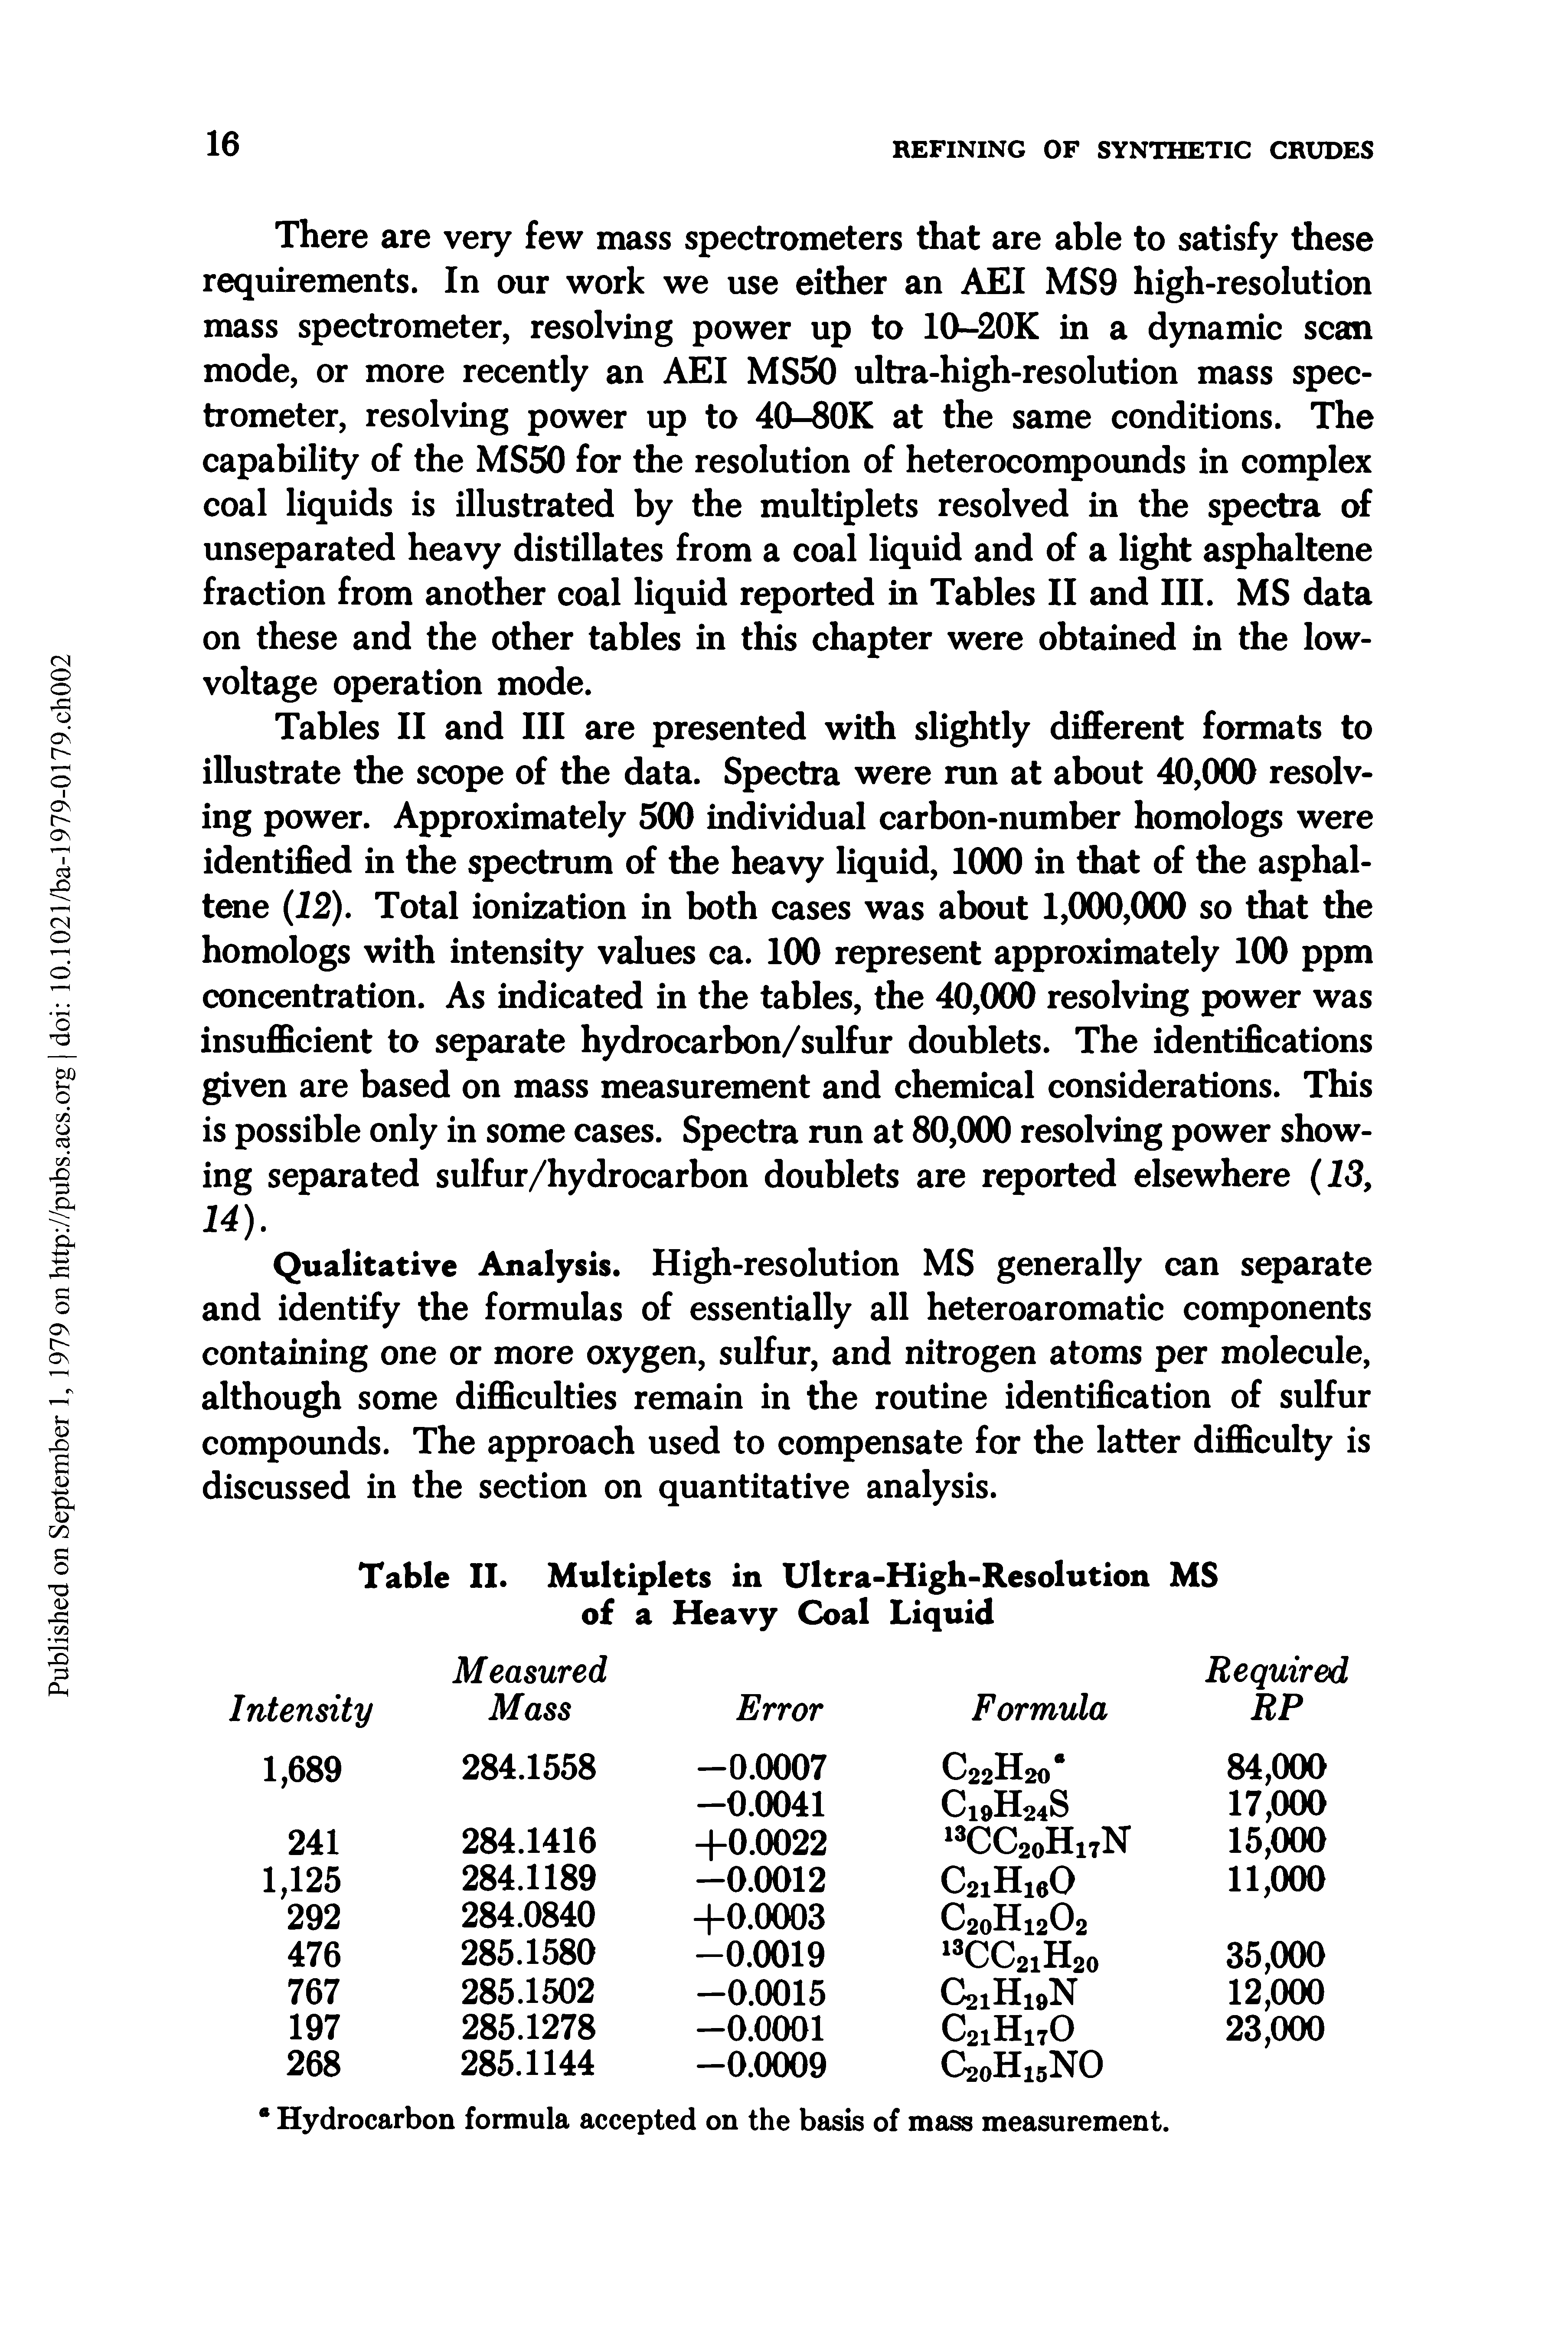 Tables II and III are presented with slightly different formats to illustrate the scope of the data. Spectra were run at about 40,000 resolving power. Approximately 500 individual carbon-number homologs were identified in the spectrum of the heavy liquid, 1000 in that of the asphaltene (12). Total ionization in both cases was about 1,000,000 so that the homologs with intensity values ca. 100 represent approximately 100 ppm concentration. As indicated in the tables, the 40,000 resolving power was insufficient to separate hydrocarbon/sulfur doublets. The identifications given are based on mass measurement and chemical considerations. This is possible only in some cases. Spectra run at 80,000 resolving power showing separated sulfur/hydrocarbon doublets are reported elsewhere (13, 14).